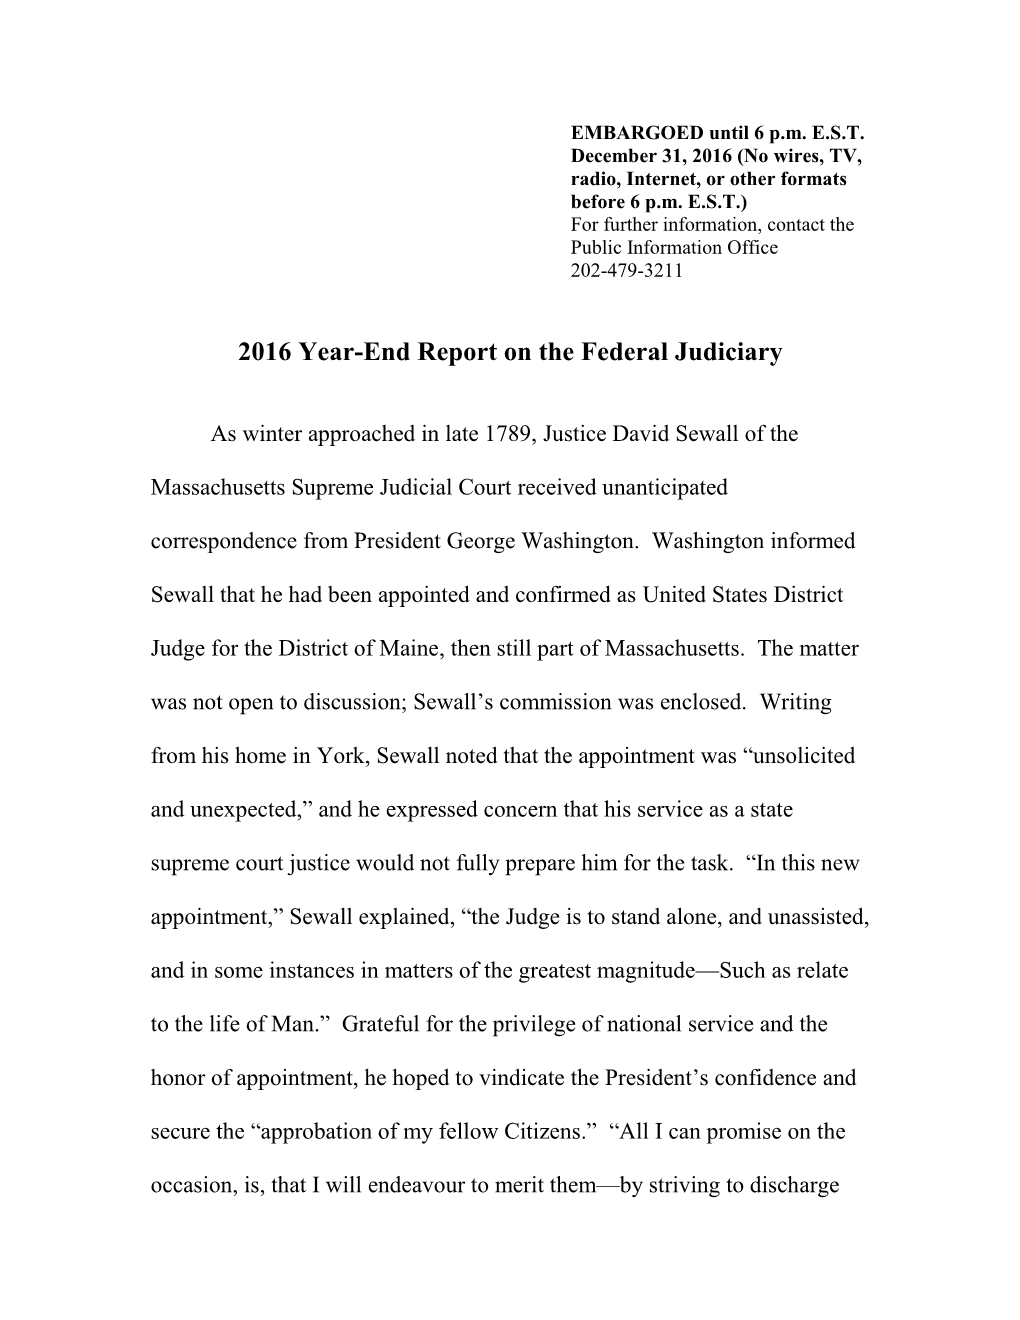 2016 Year-End Report on the Federal Judiciary